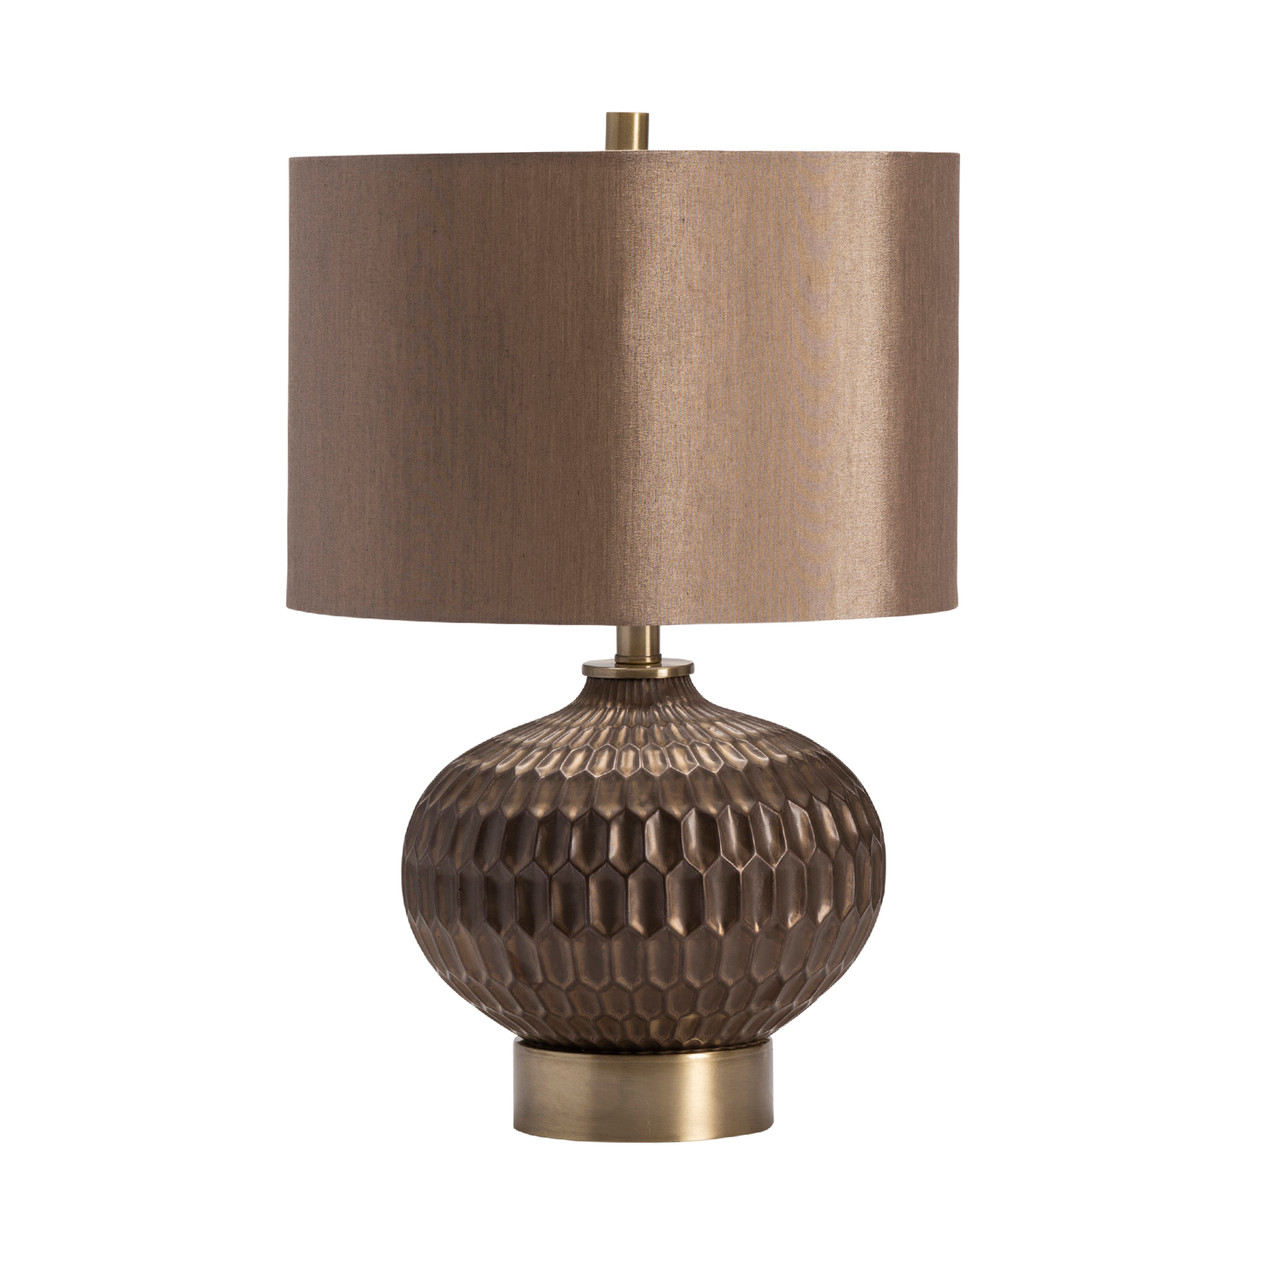 CRESTVIEW COLLECTION CVAZP045 Bowen Faceted Table Lamp